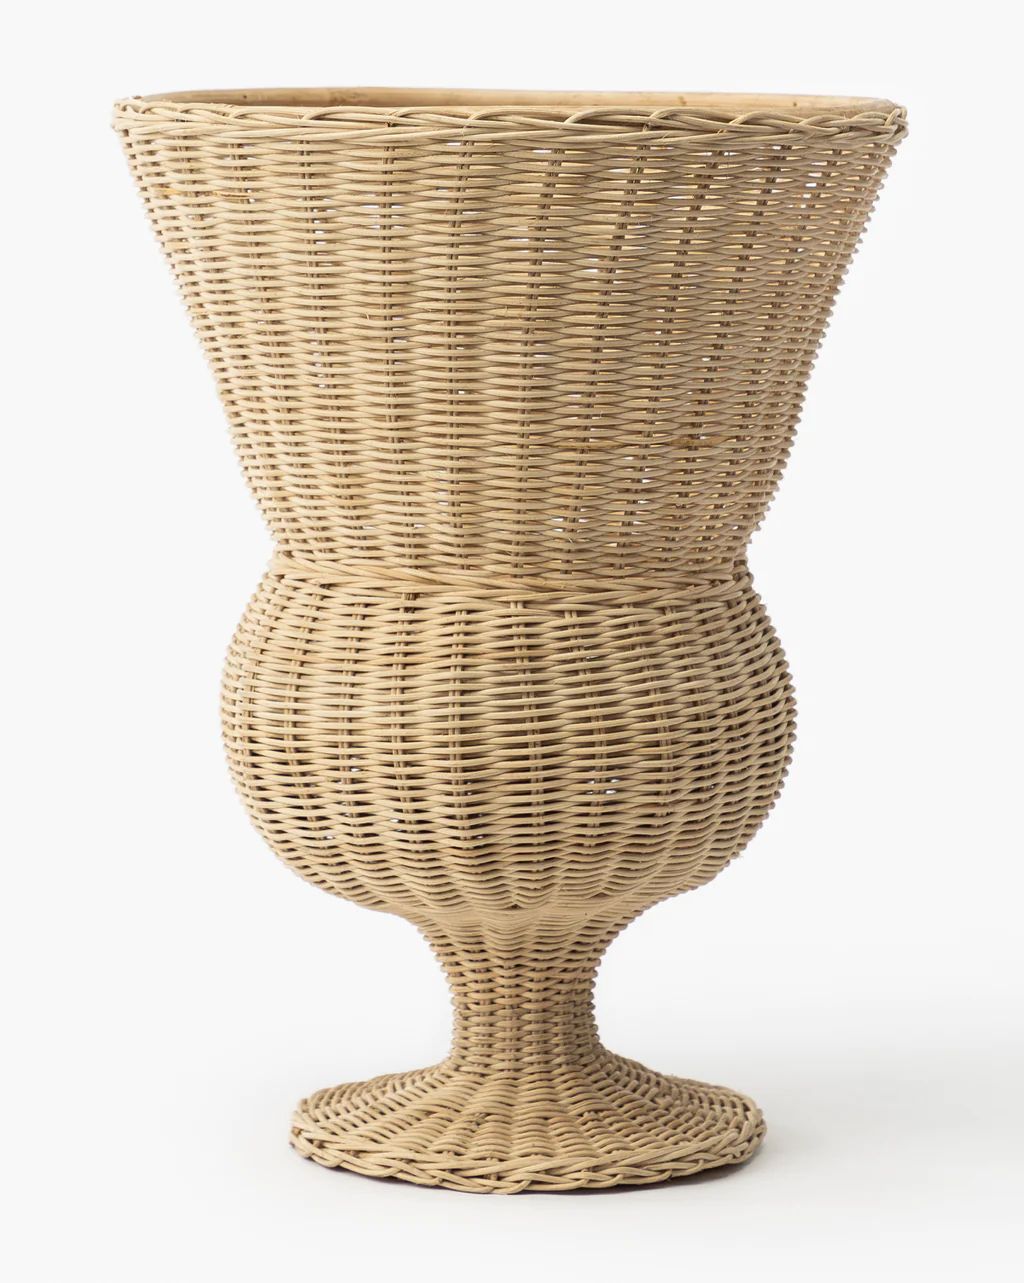 Wicker Footed Urn | McGee & Co.